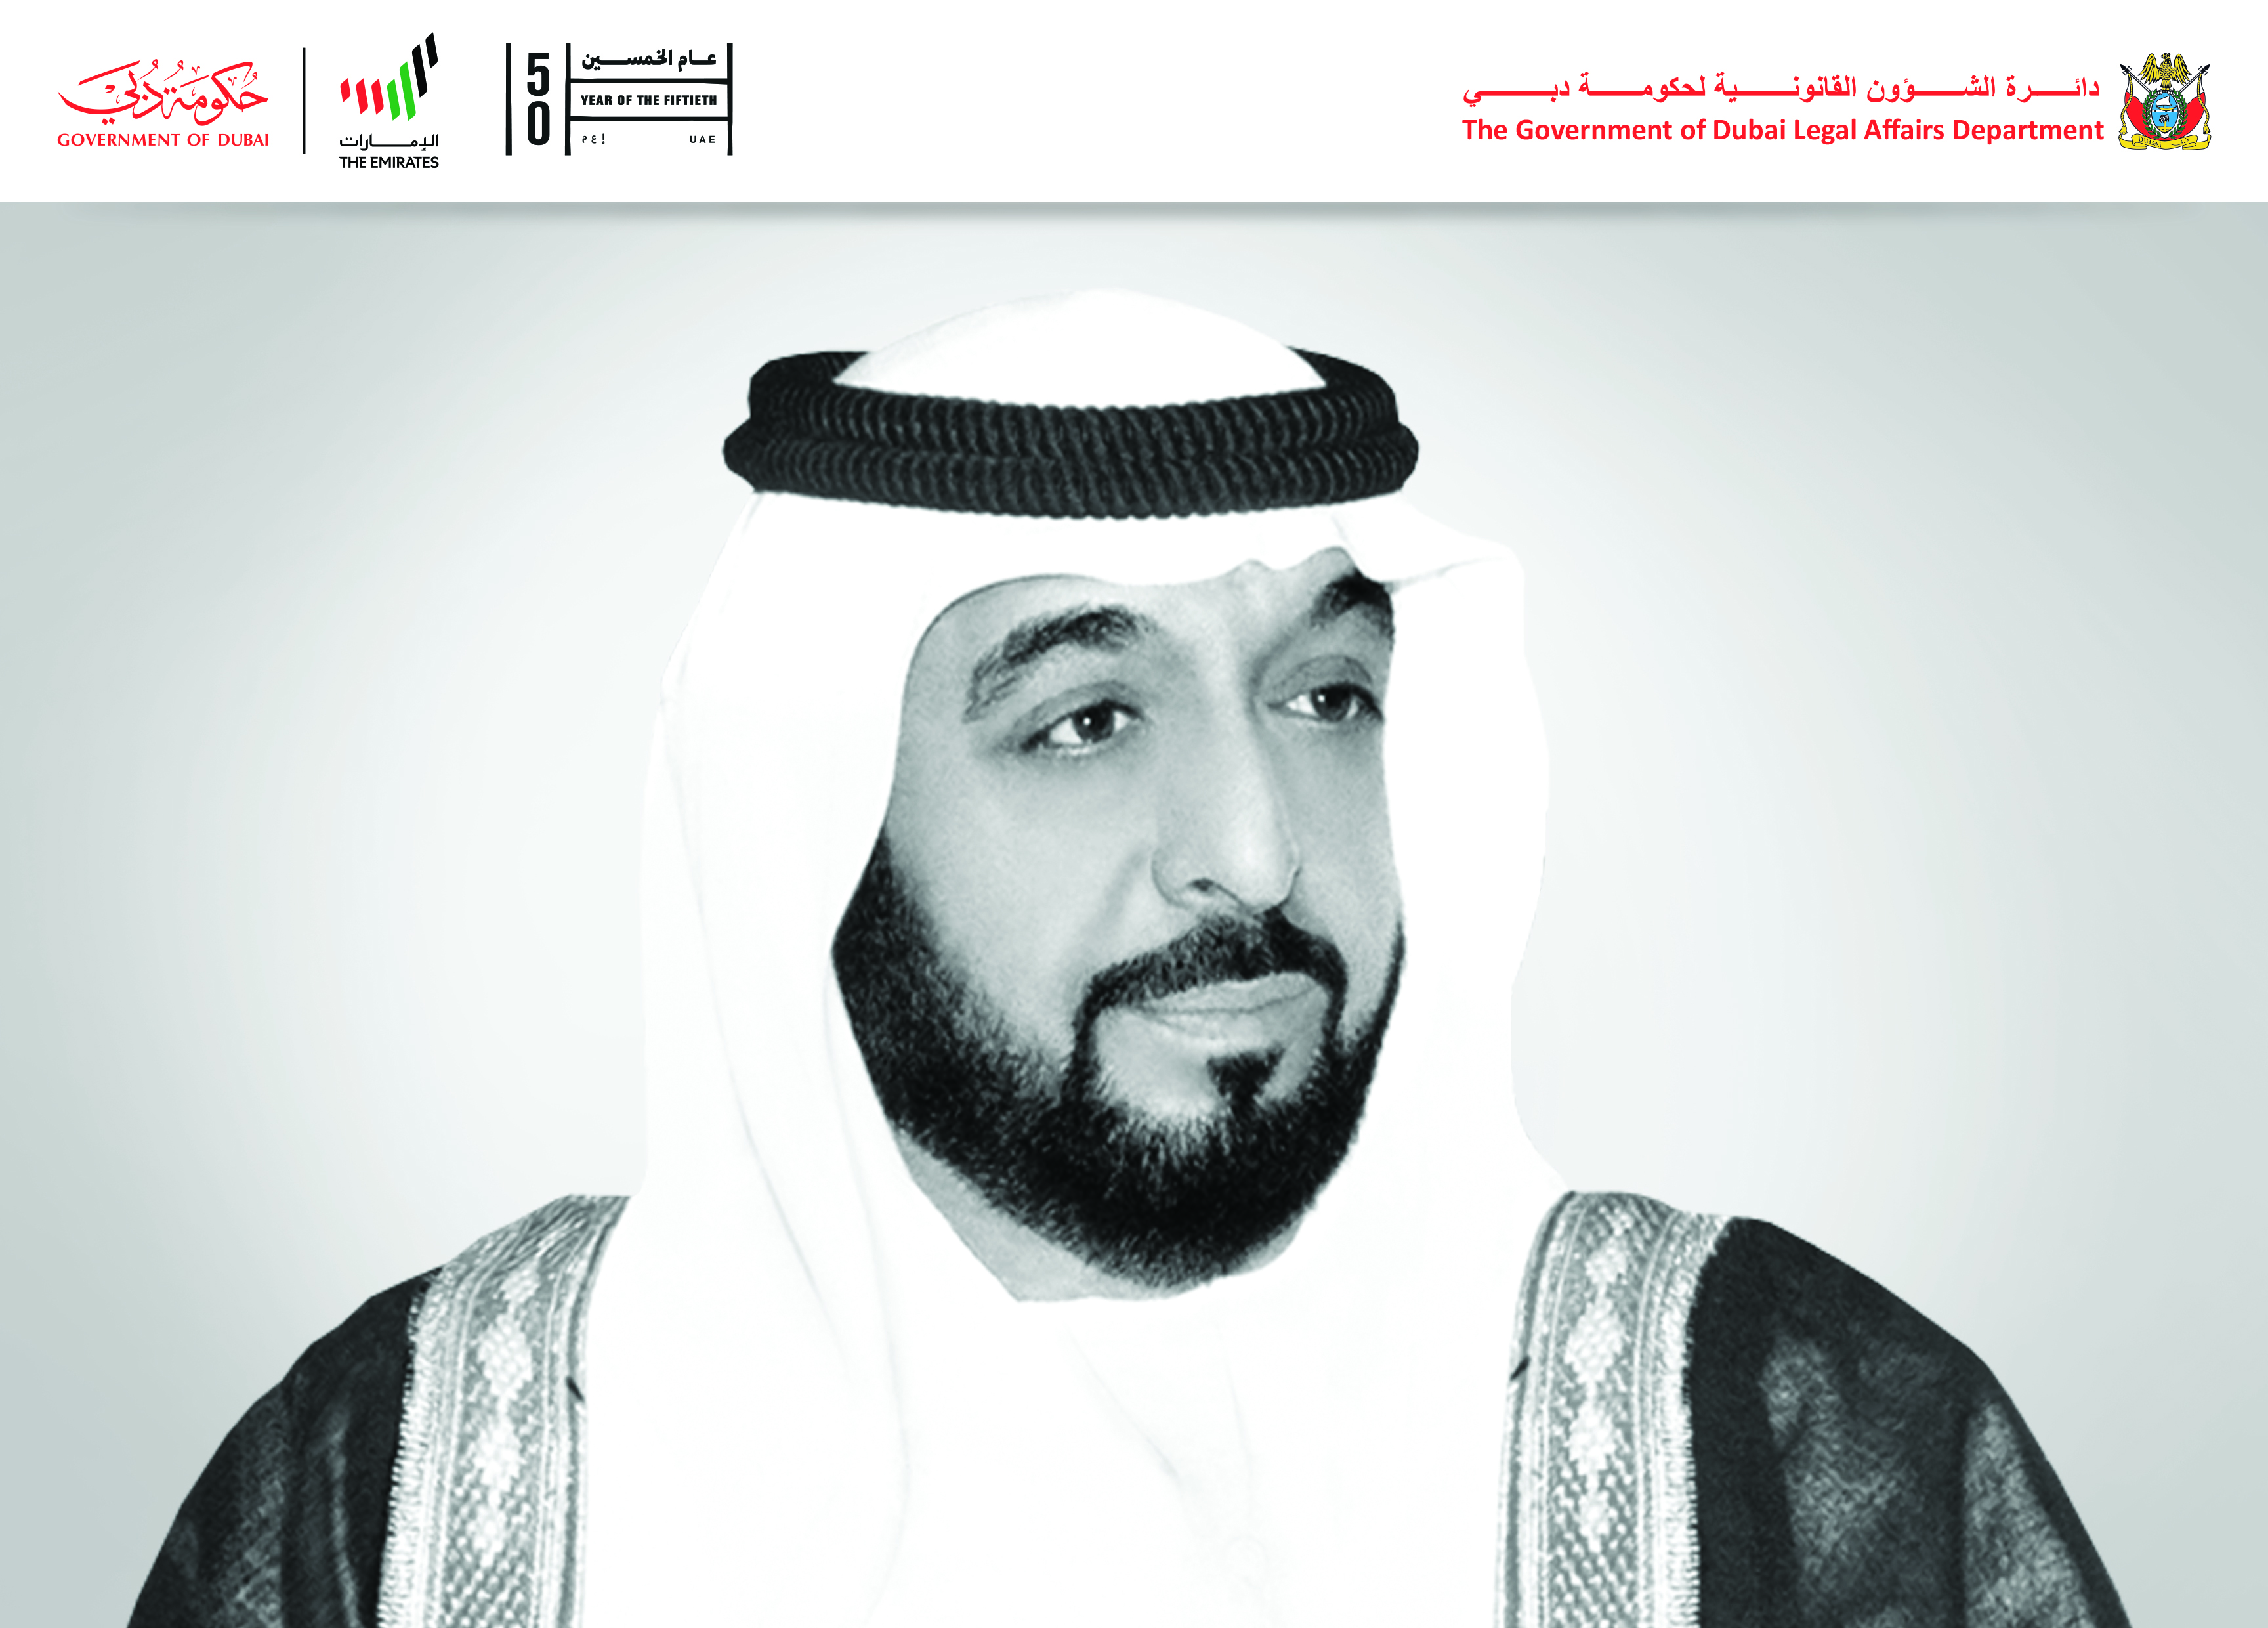 Statement by His Excellency the Director General of the Government of Dubai Legal Affairs Department on the Sad Loss of His Highness Sheikh Khalifa bin Zayed Al Nahyan, the President of the UAE (May his soul Rest in Peace).